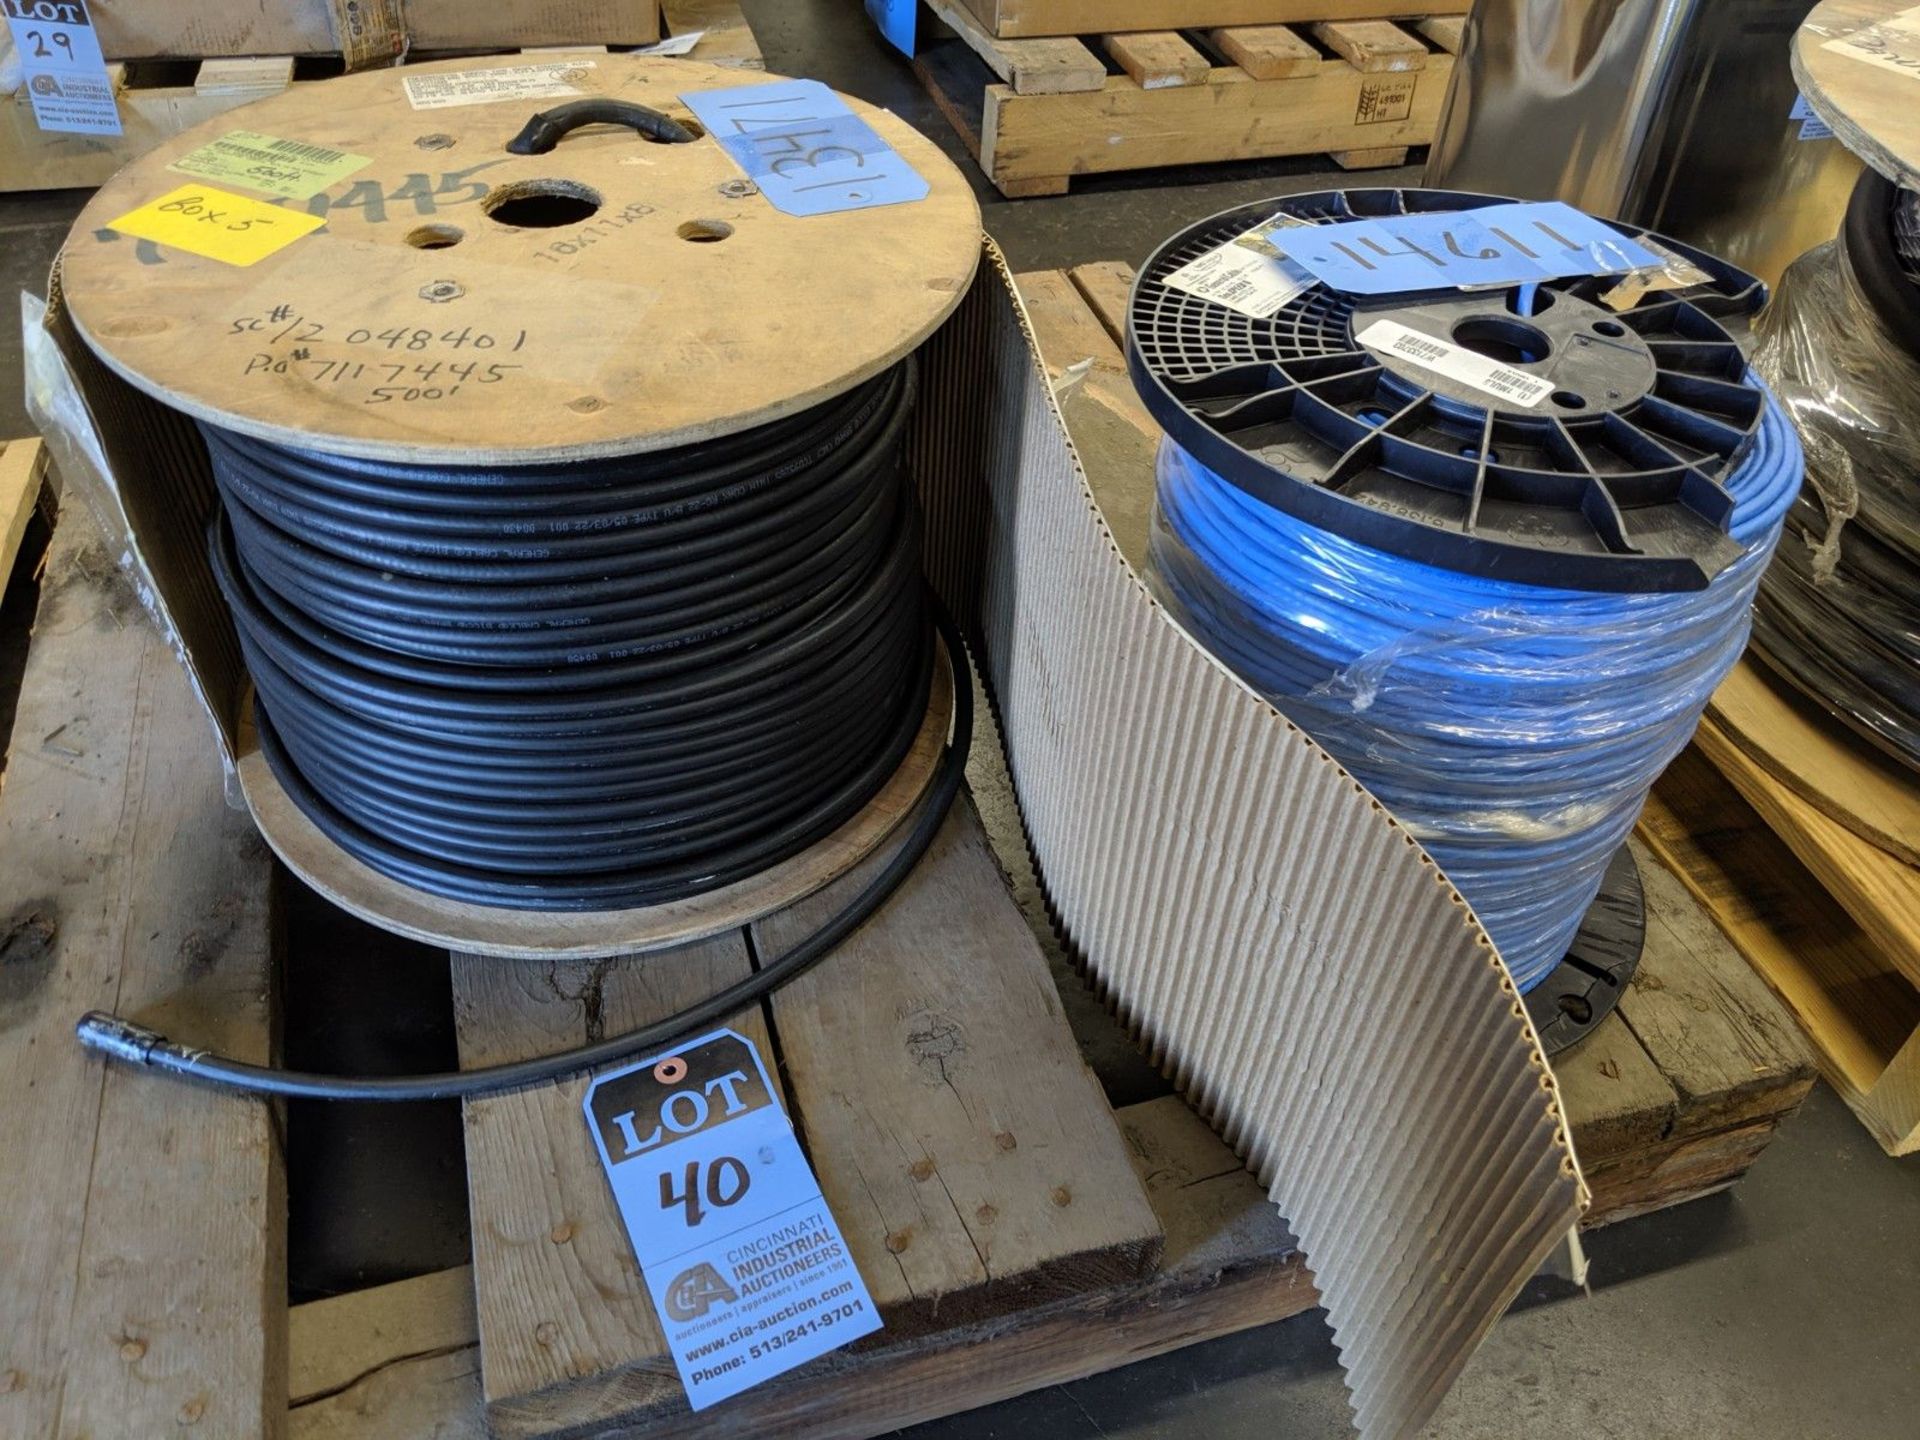 (LOT) 500' REEL COAXIL CABLE AND 1000' CAT 6 DATA TRANSMISSION WIRE